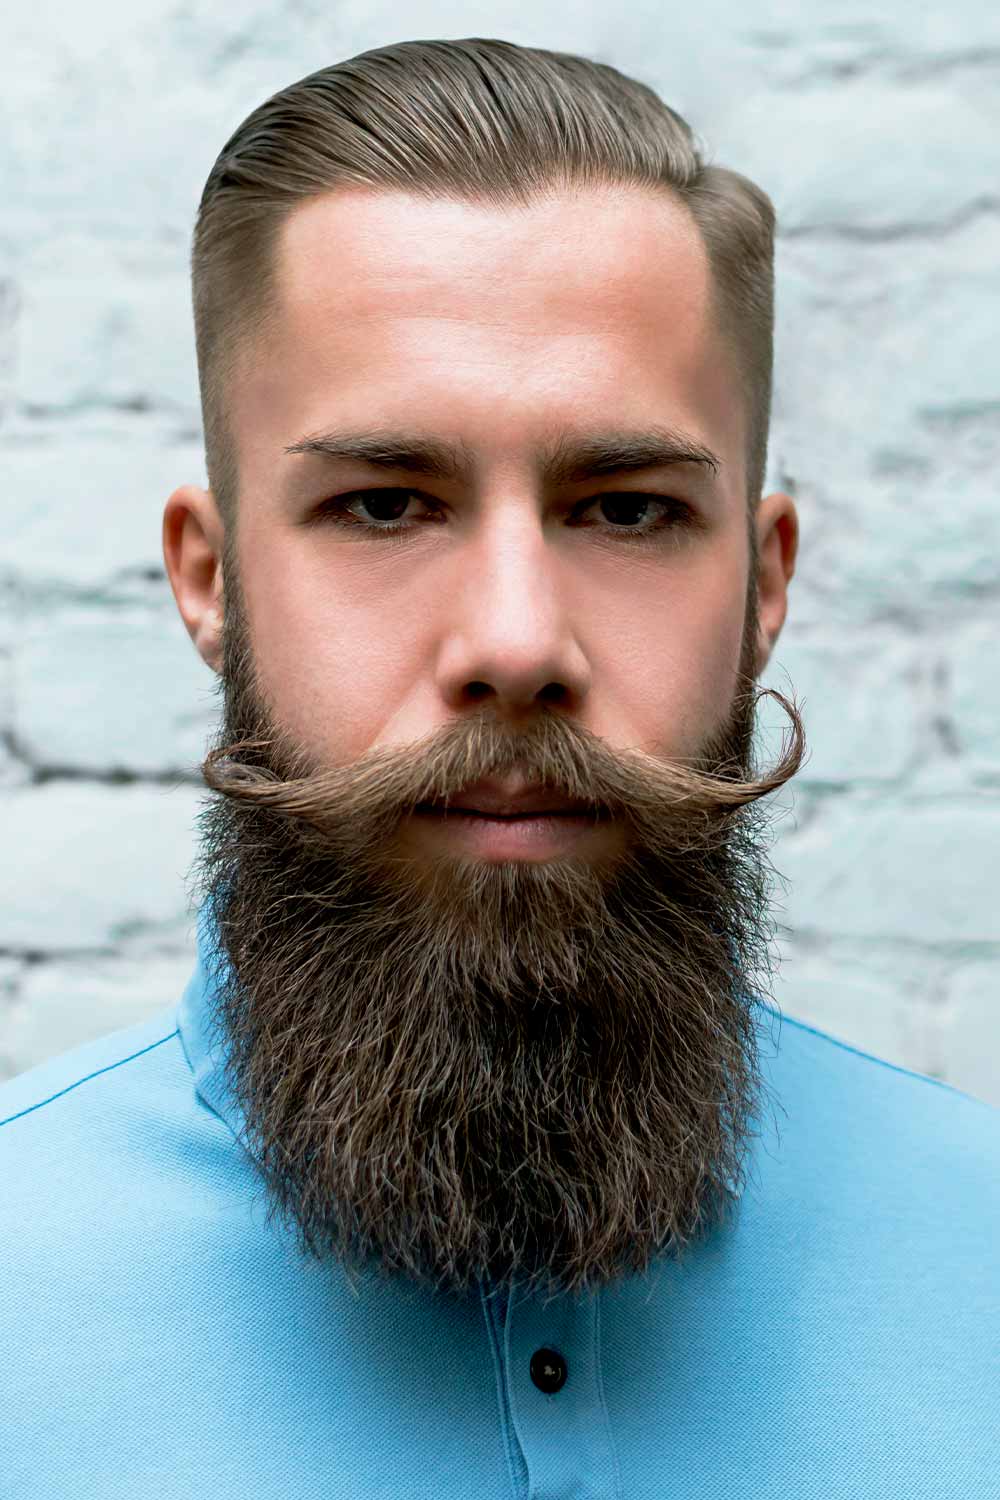 55 Coolest Faded Beard and Haircut Styles in 2023